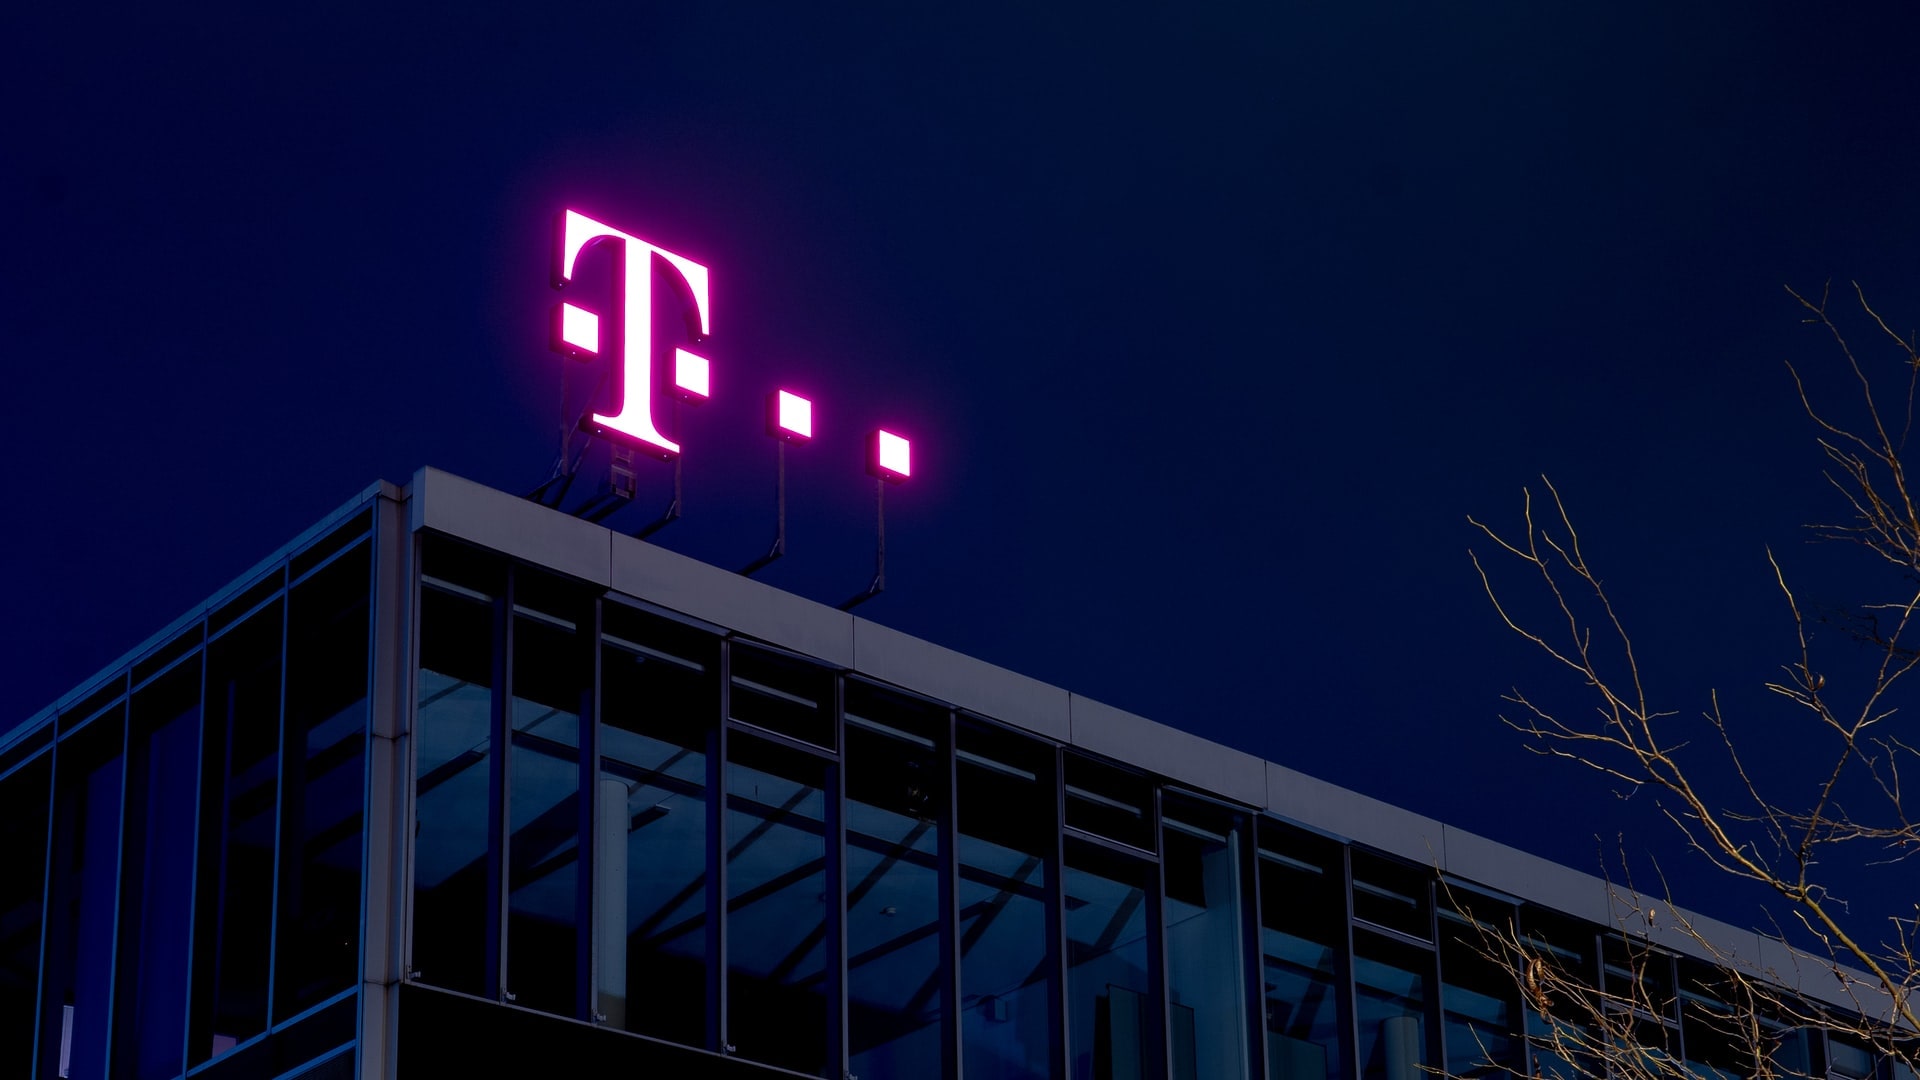 The Telekom logo on a building.